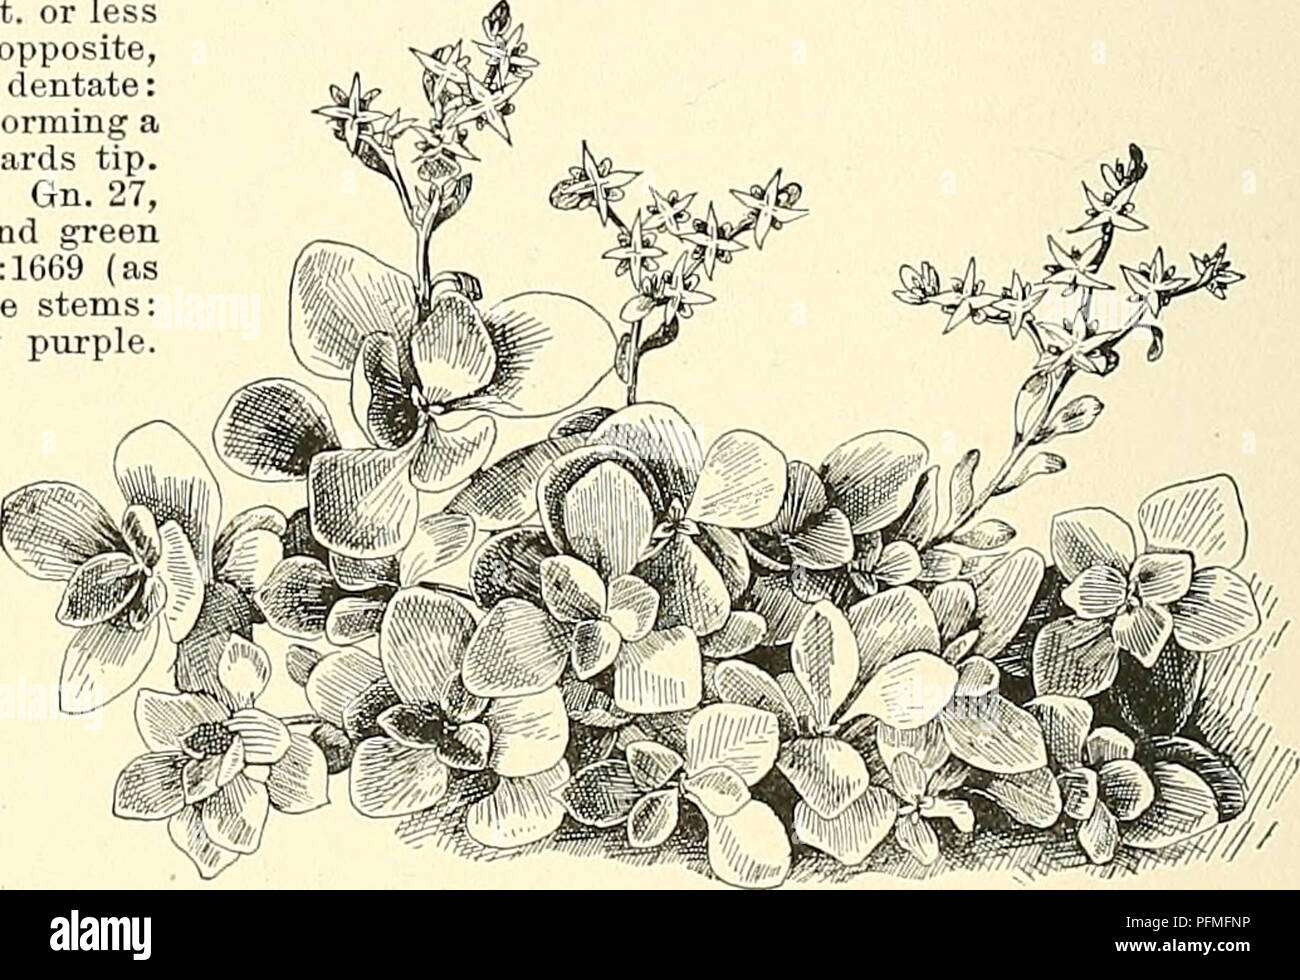 . Cyclopedia of American horticulture, comprising suggestions for cultivation of horticultural plants, descriptions of the species of fruits, vegetables, flowers, and ornamental plants sold in the United States and Canada, together with geographical and biographical sketches. Gardening. 2282. Live-foreverâSedum Telephium (X K). sometimes pure white, in dense, terminal and lateral subglobose cymes. Jul}-, Aug. Eu., N.Asia. Gu. 27, p. 3i6. âNaturalized in America, where it spreads much hut blooms little. Vars. hybridum, purpiireum and rubrum are live American trade names representing forms -with Stock Photo